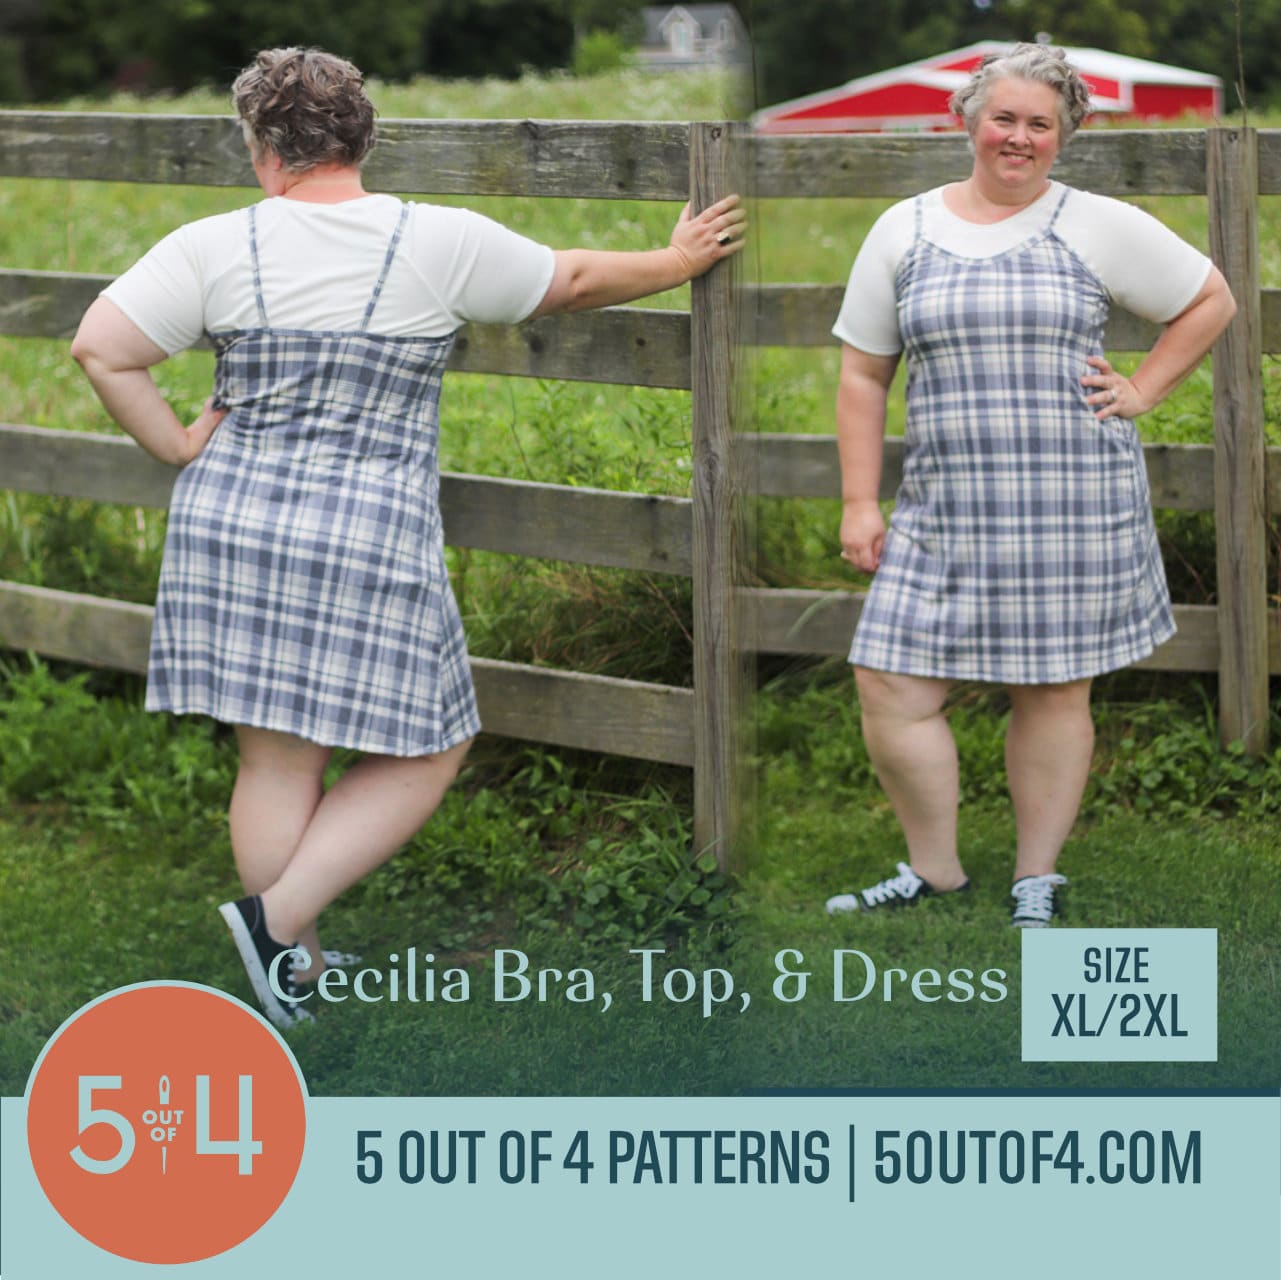 Cecilia Bra, Top and Dress - 5 out of 4 Patterns